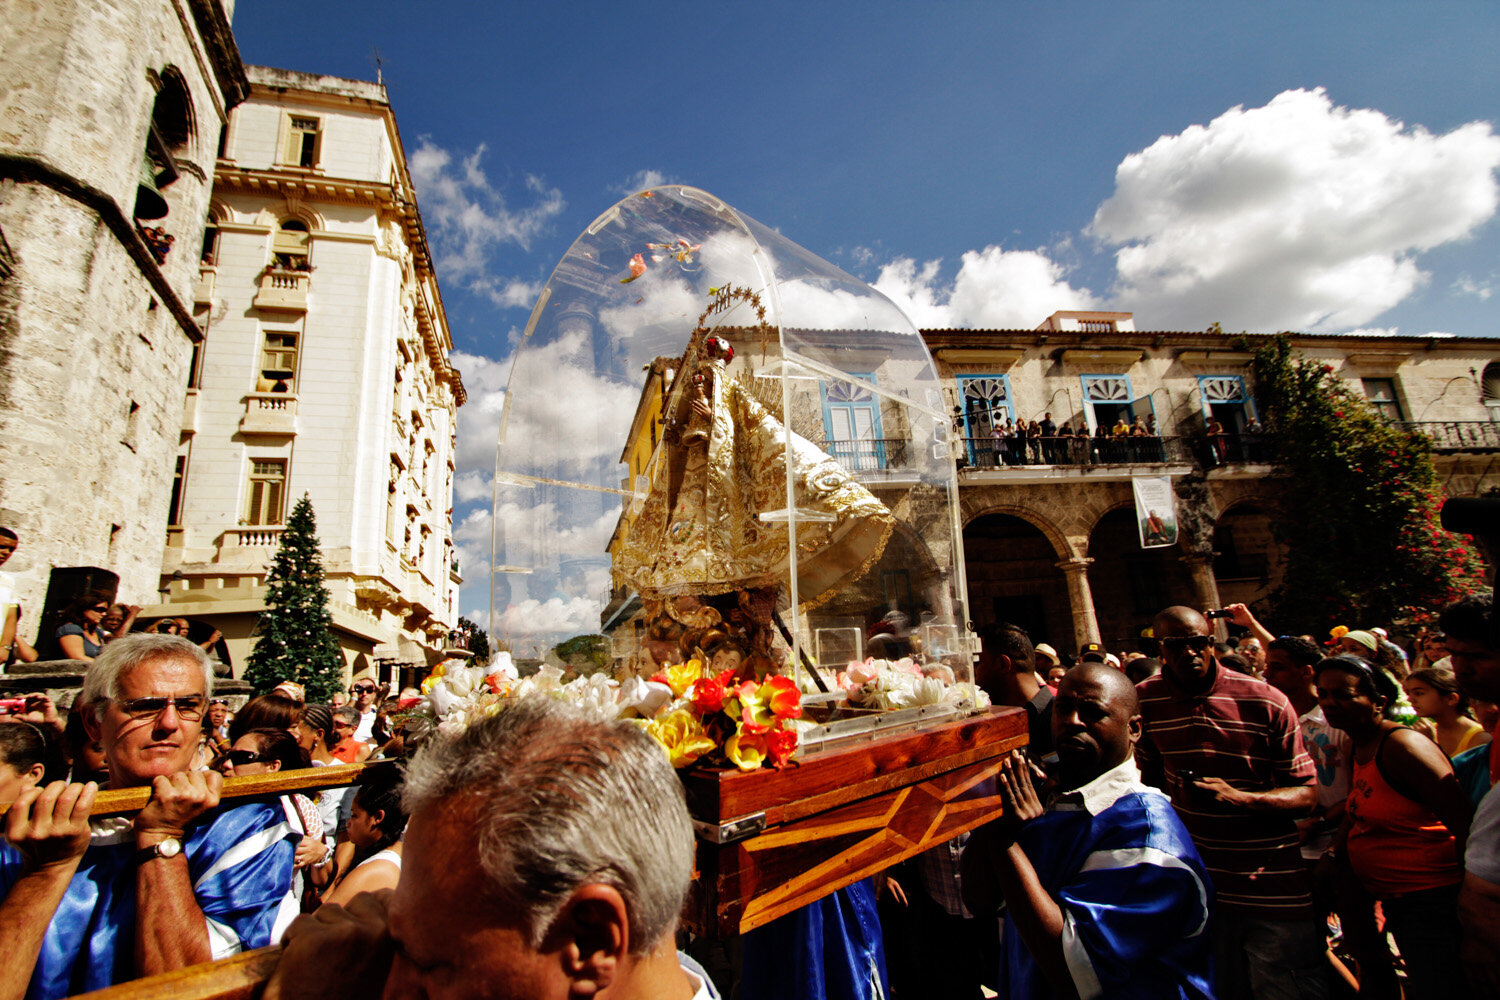  The Virgin of the Charity (Virgen de la Caridad), the catholic patroness of Cuba, arrives at the cathedral of Havana, 2011                      